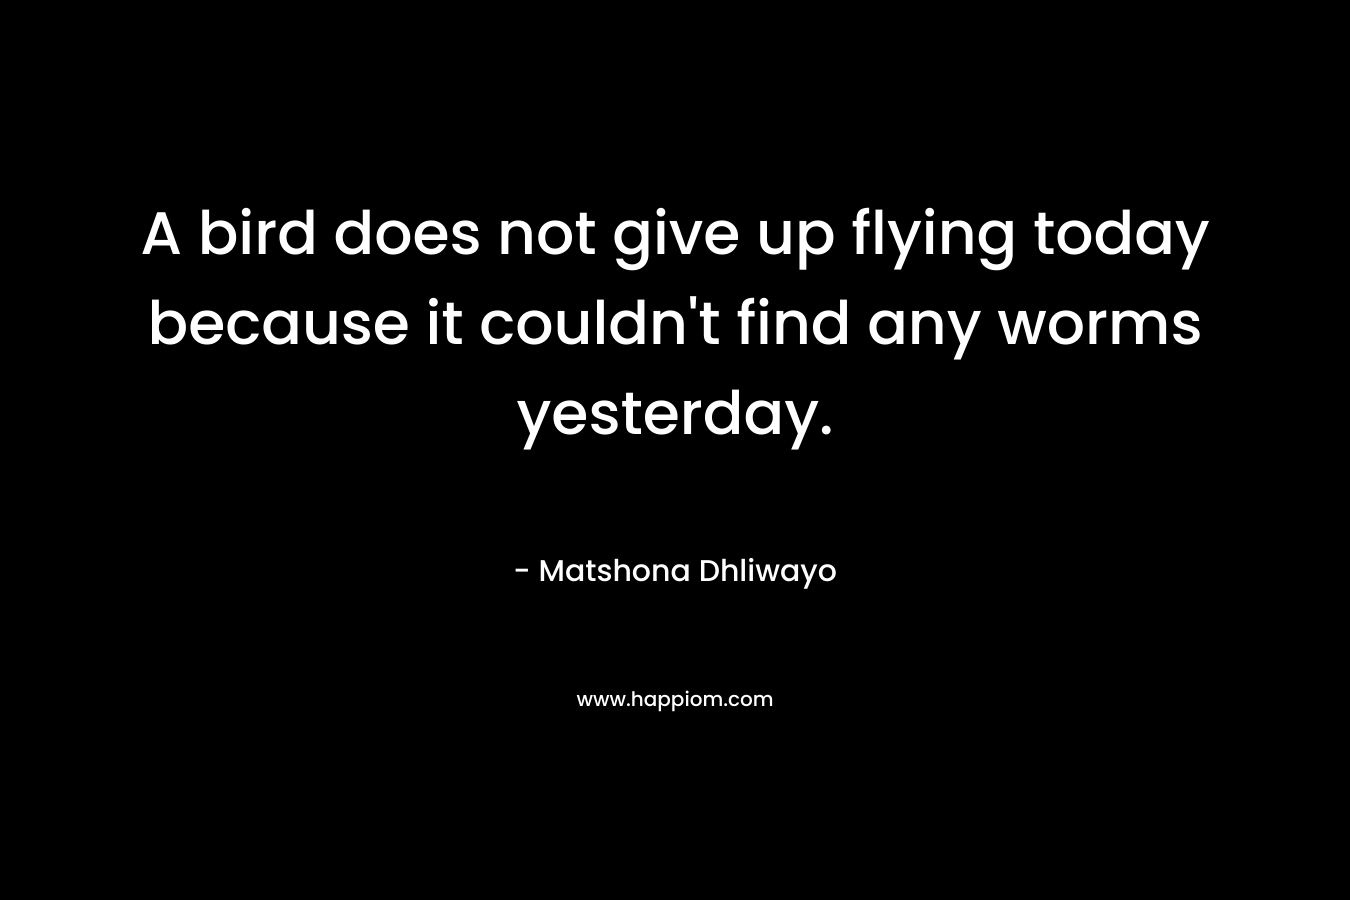 A bird does not give up flying today because it couldn't find any worms yesterday.